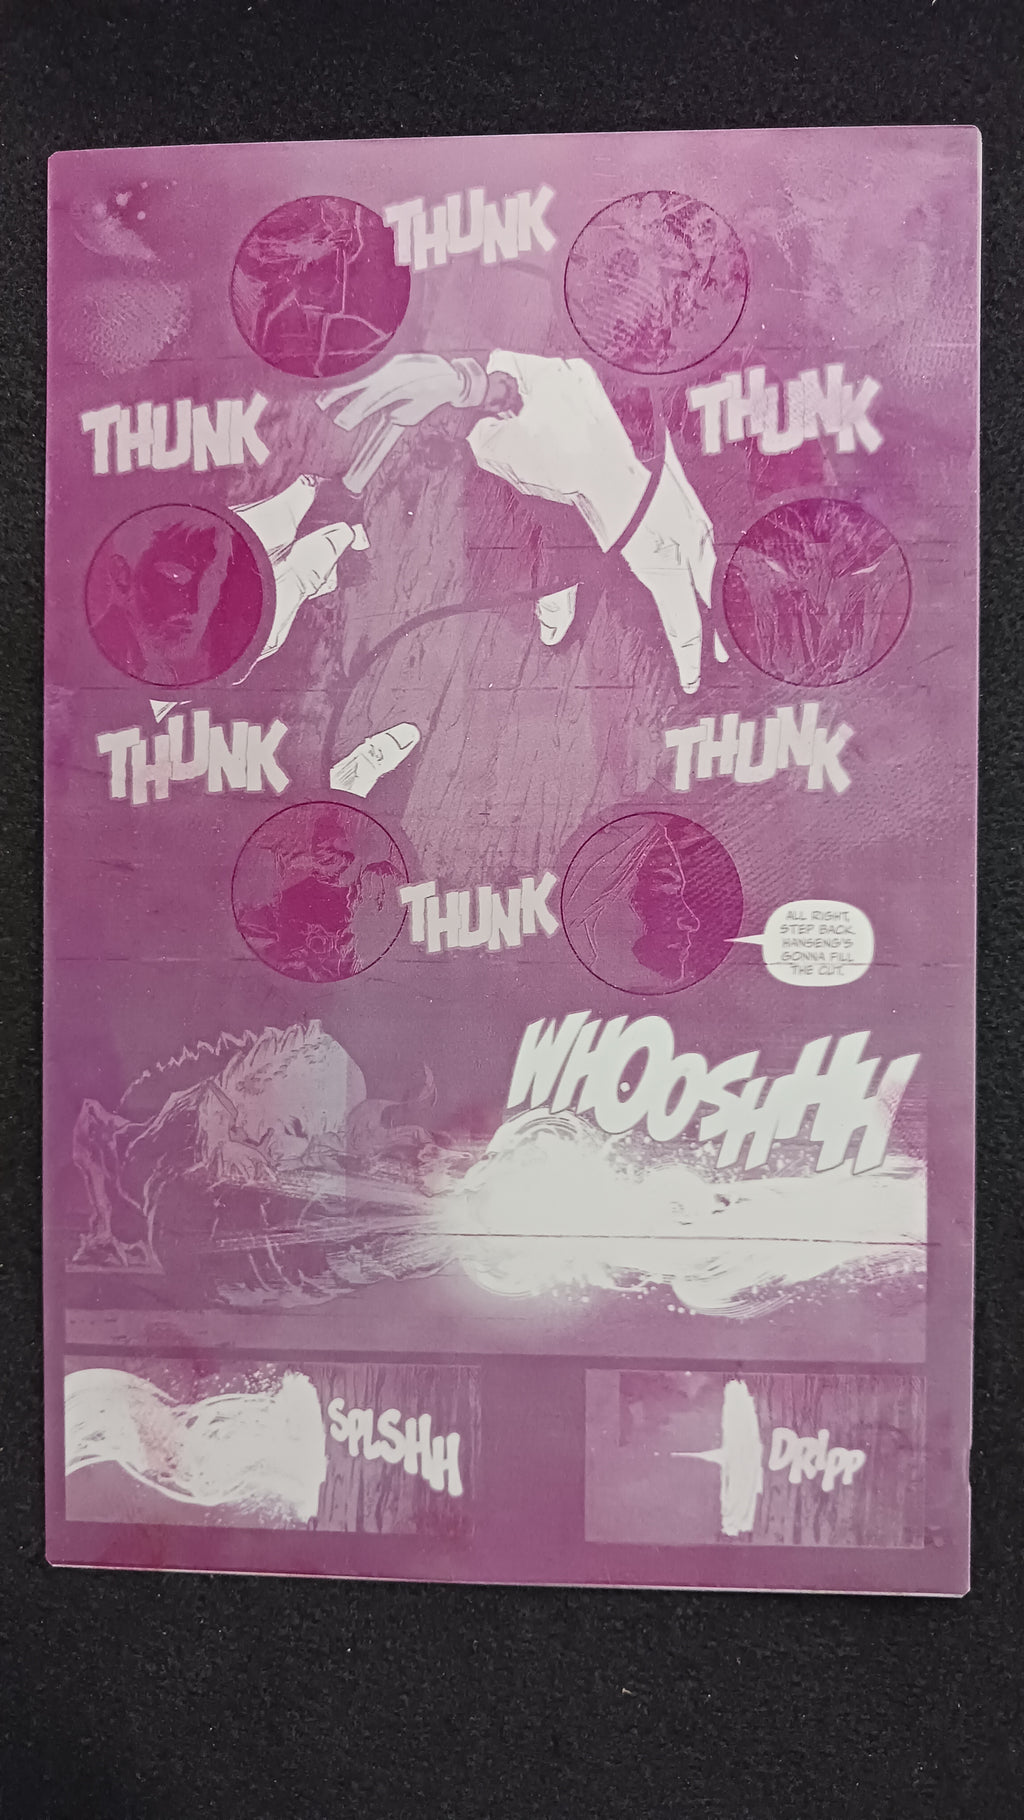 West Moon Chronicles #2 - Page 19 - PRESSWORKS - Comic Art - Printer Plate - Magenta